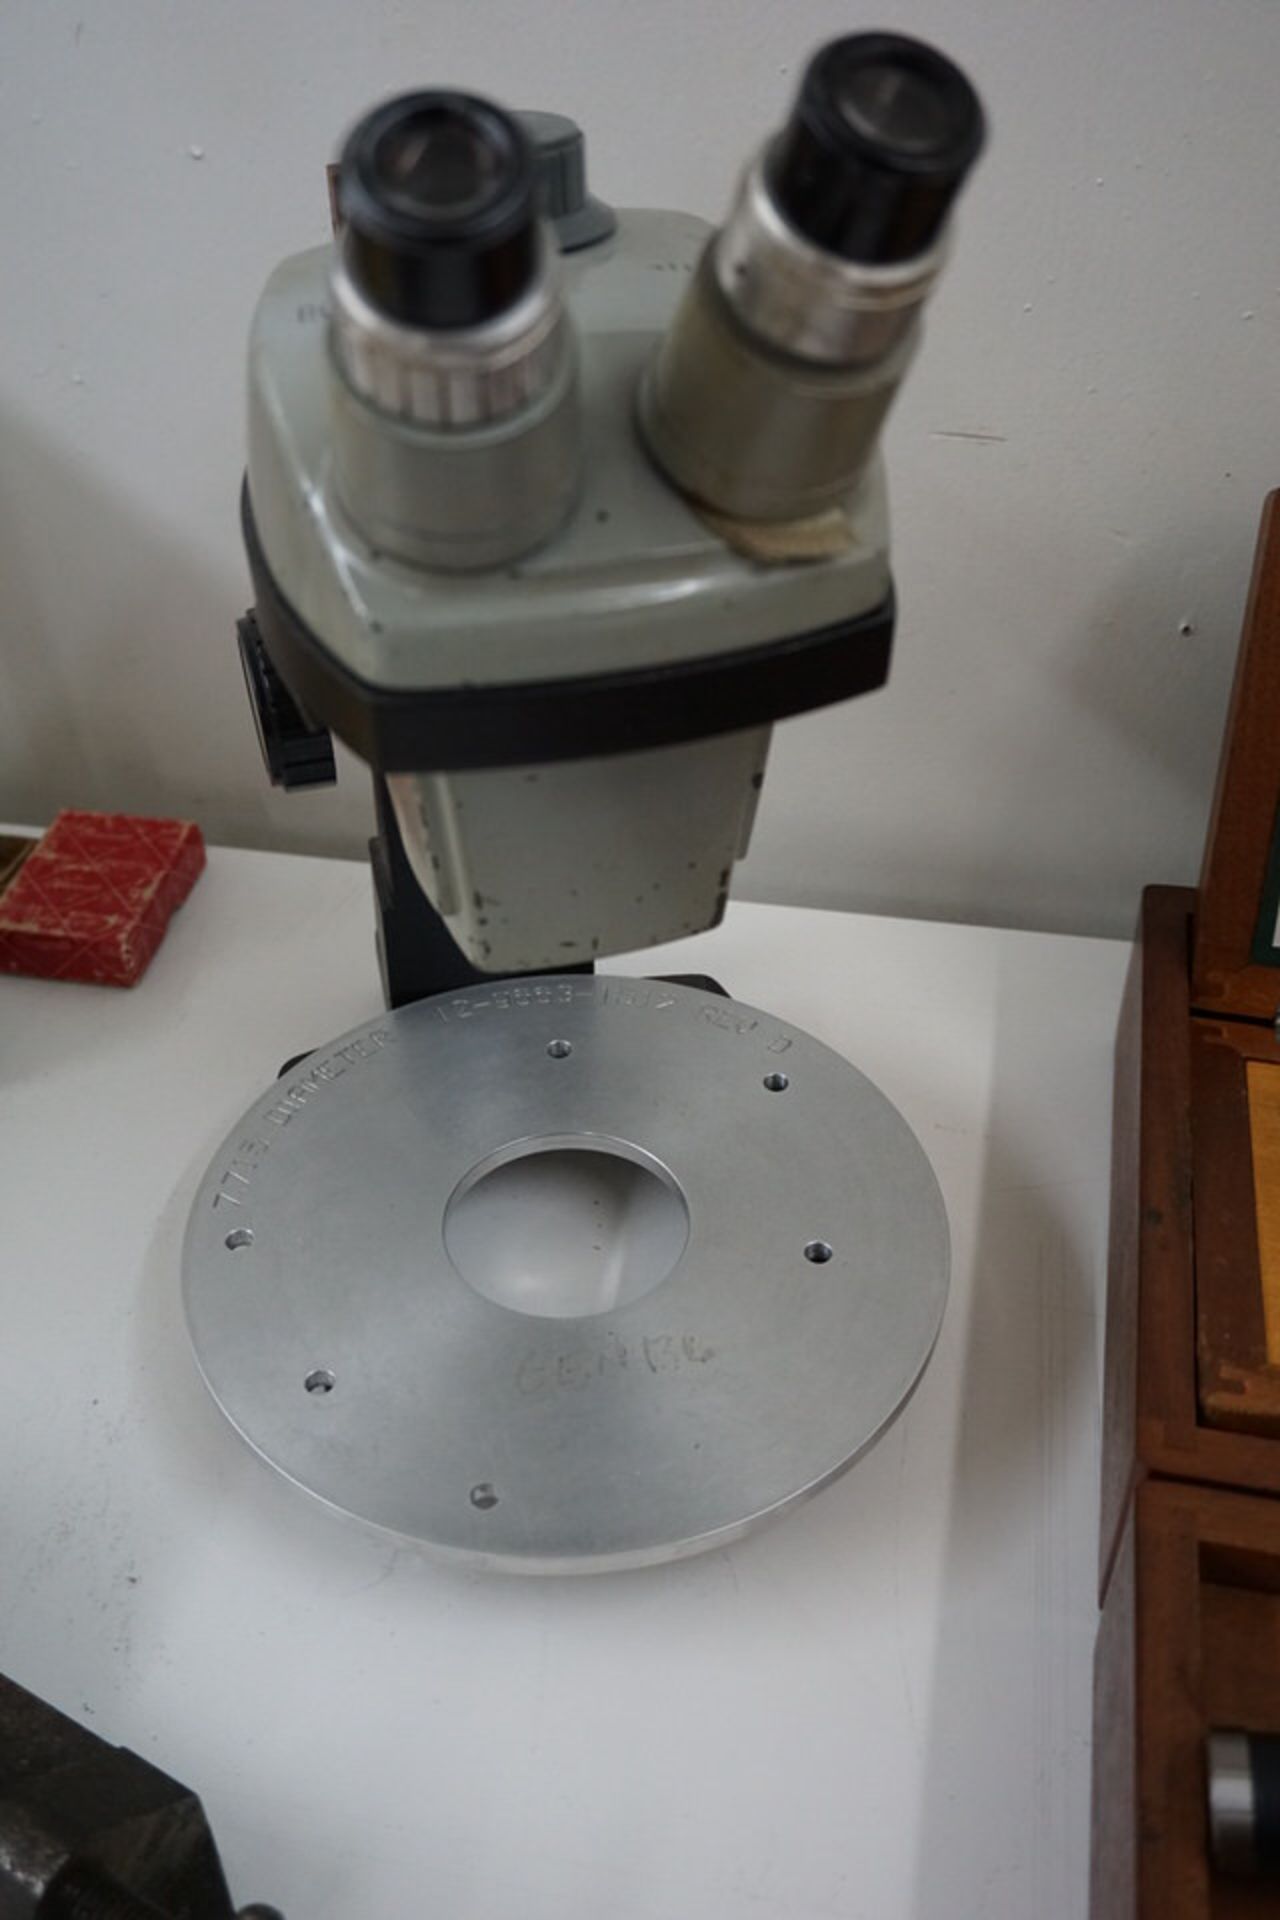 BAUSCH & LAMB MICROSCOPE, 0.7-3X W/ ASSORT INSPECTION ACCESSORIES AS SHOWN - Image 2 of 3